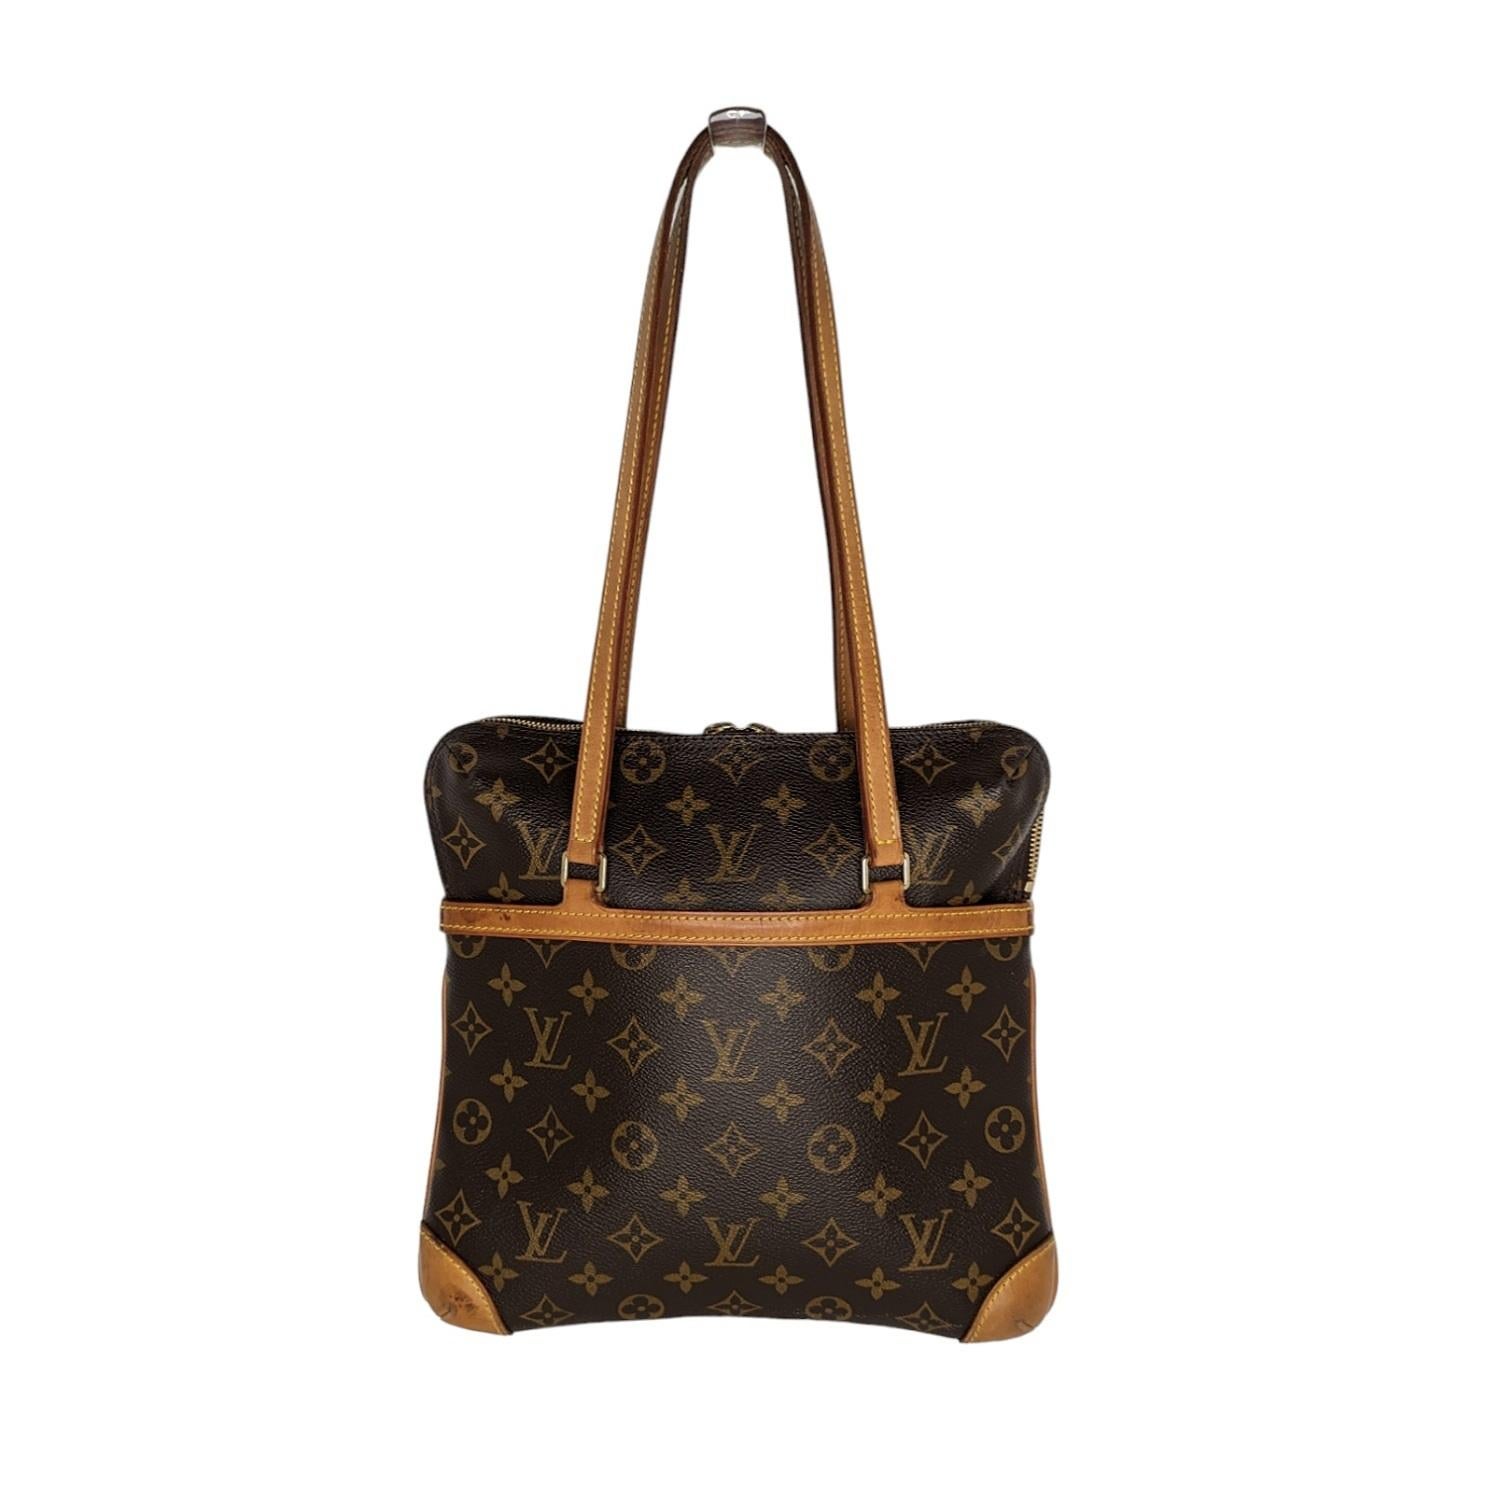 This lovely shoulder bag is crafted of classic Louis Vuitton monogram toile canvas with vachetta cowhide leather trim and strap handles. The bag features a front patch pocket and the brass top zipper opens to a red microfiber interior with patch